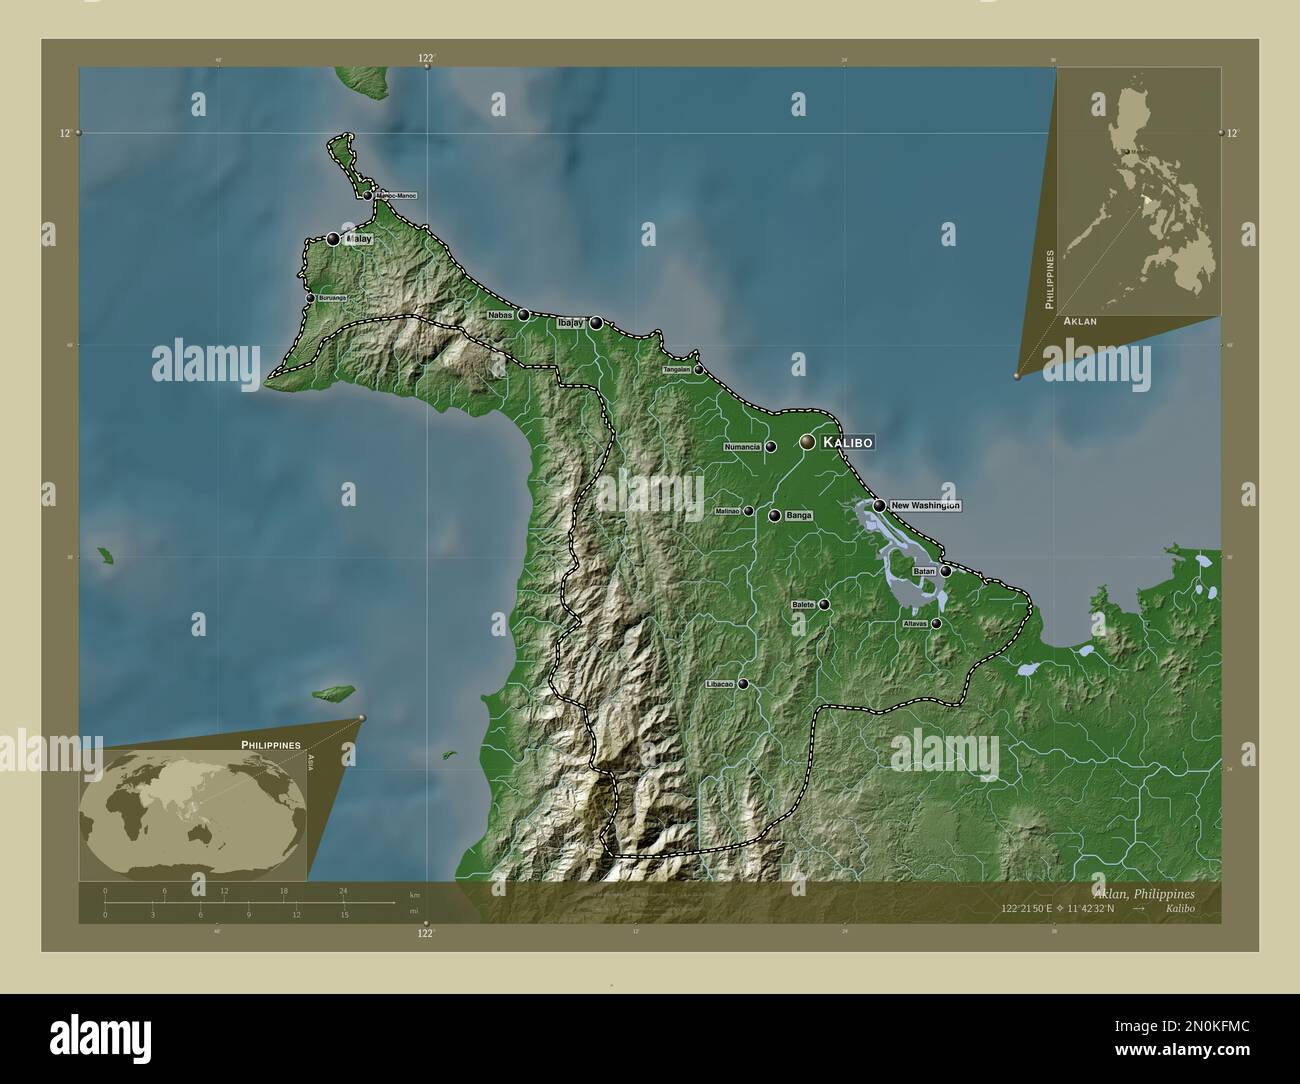 Aklan, province of Philippines. Elevation map colored in wiki style with lakes and rivers. Locations and names of major cities of the region. Corner a Stock Photo